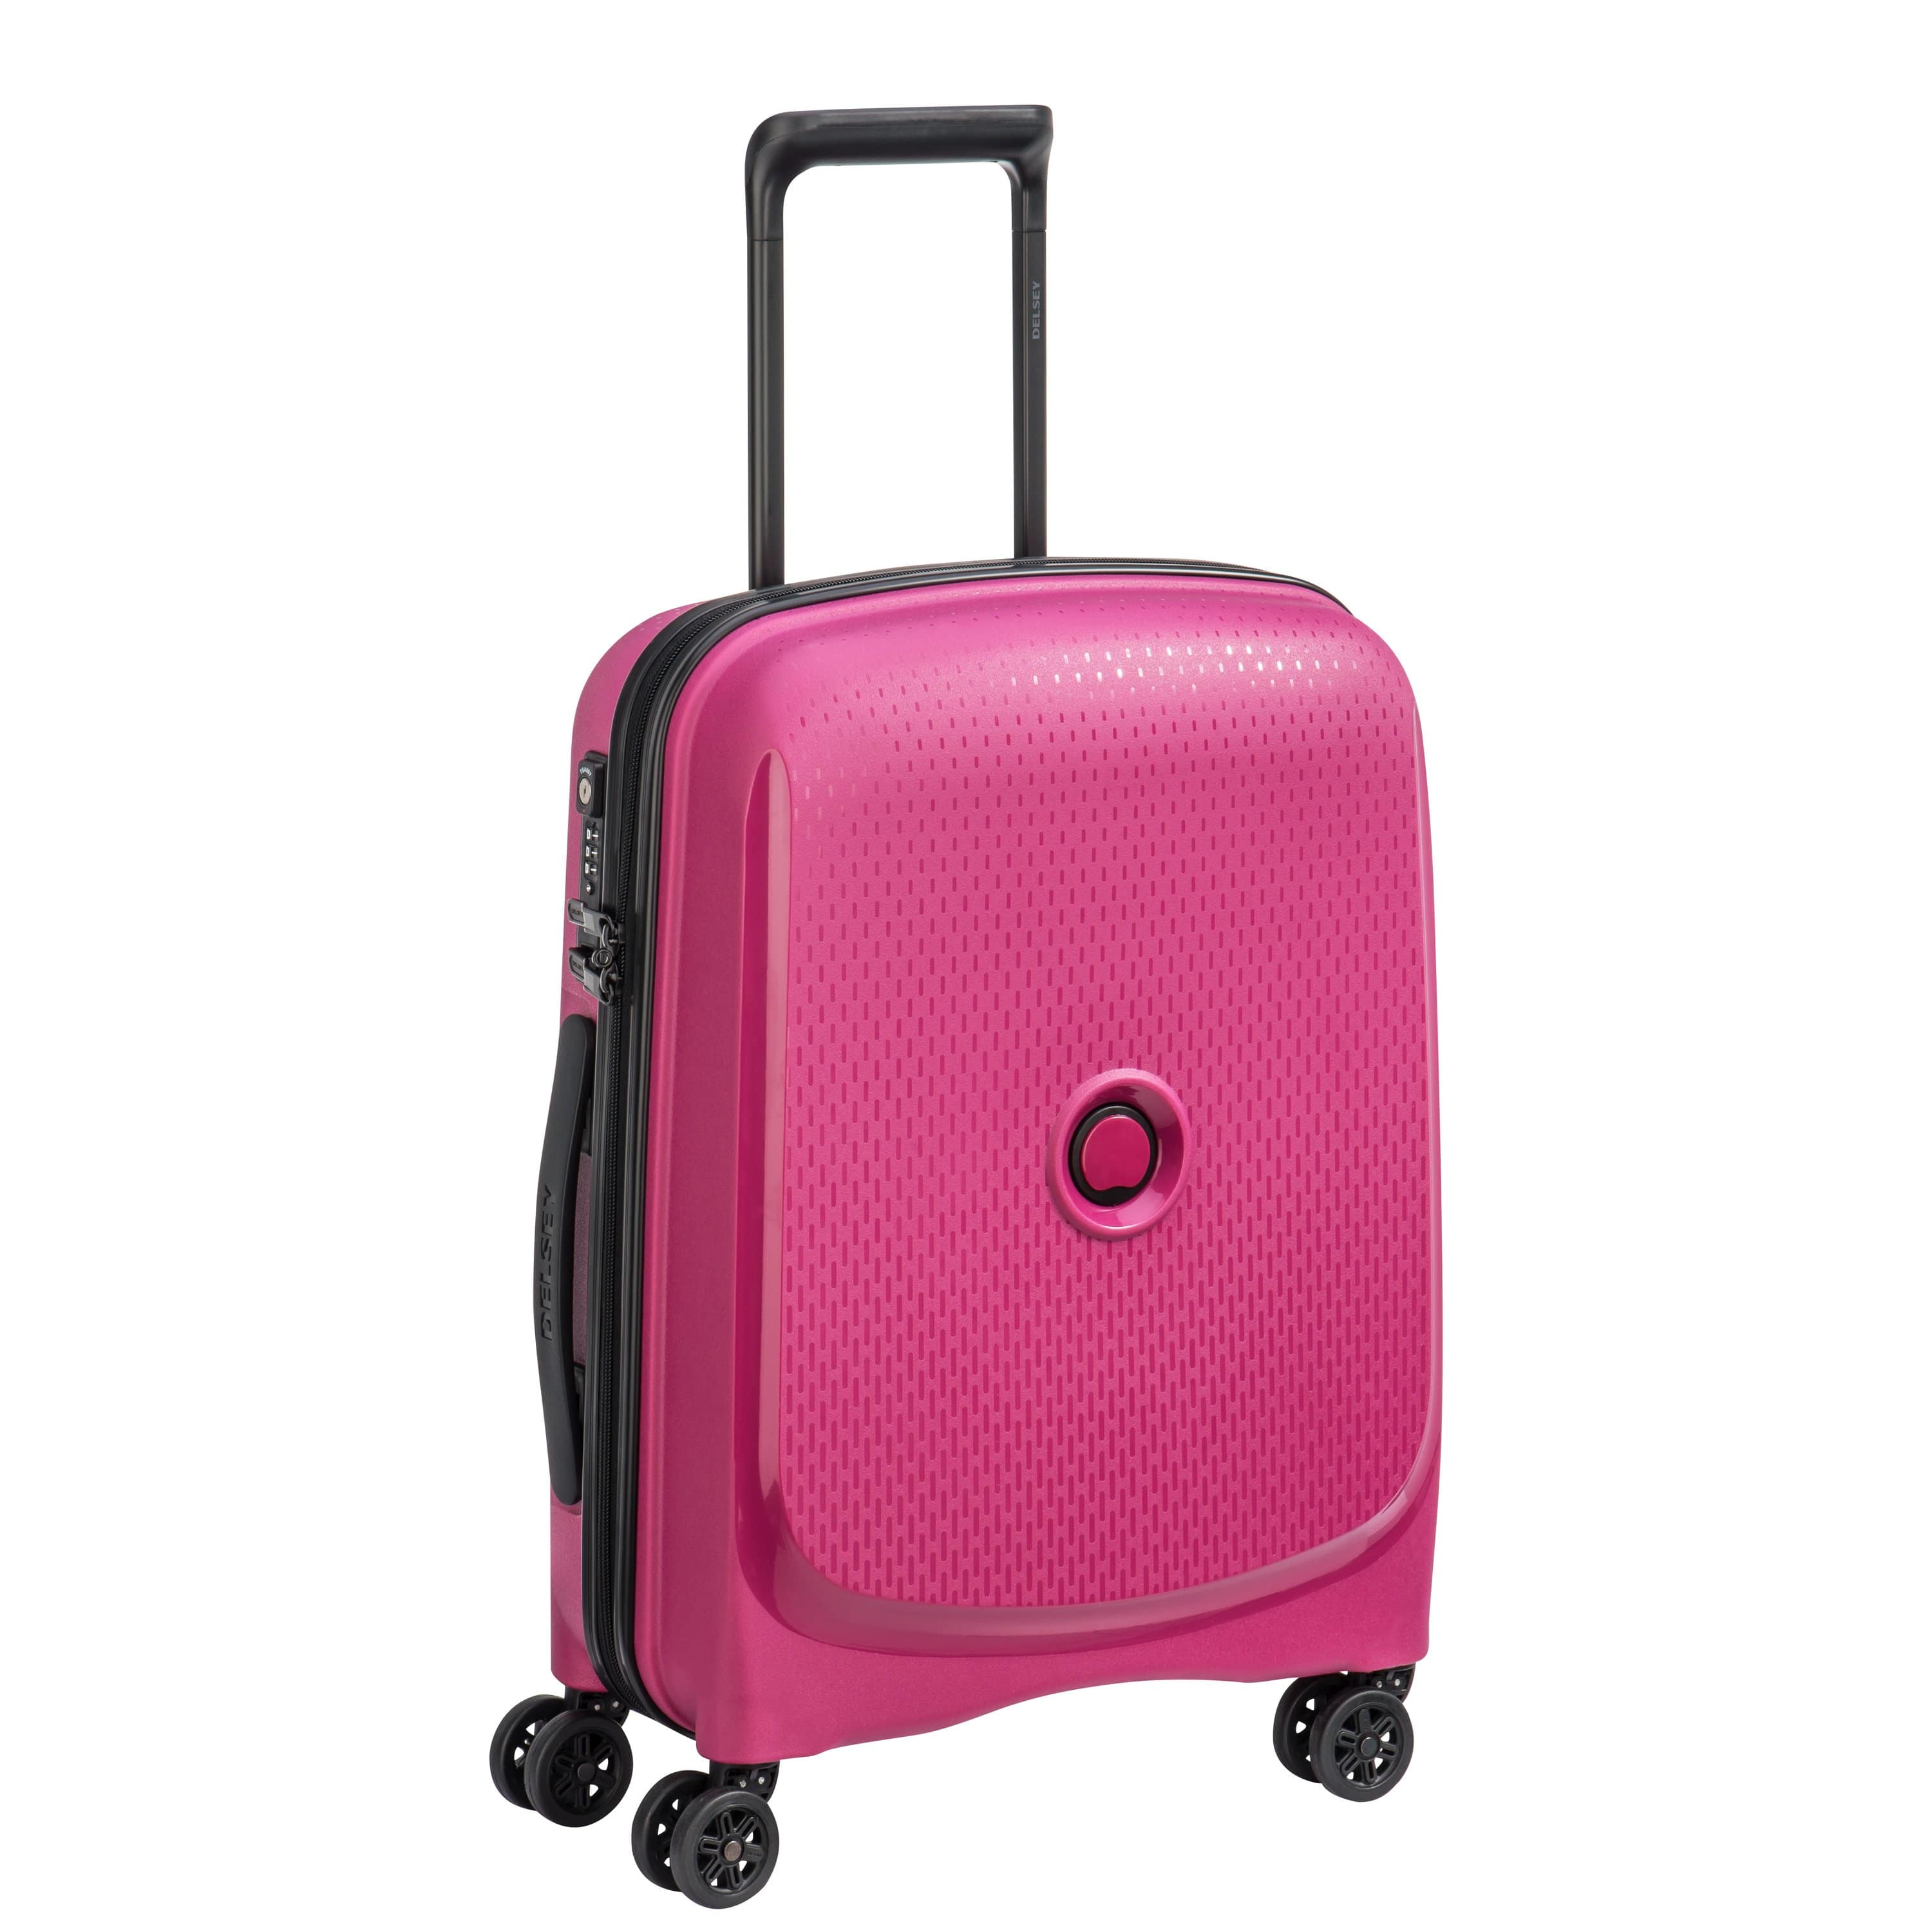 Delsey Belmont Plus 61cm Hardcase 4 Double Wheel Expandable Cabin Luggage Trolley Pink - 00386180509